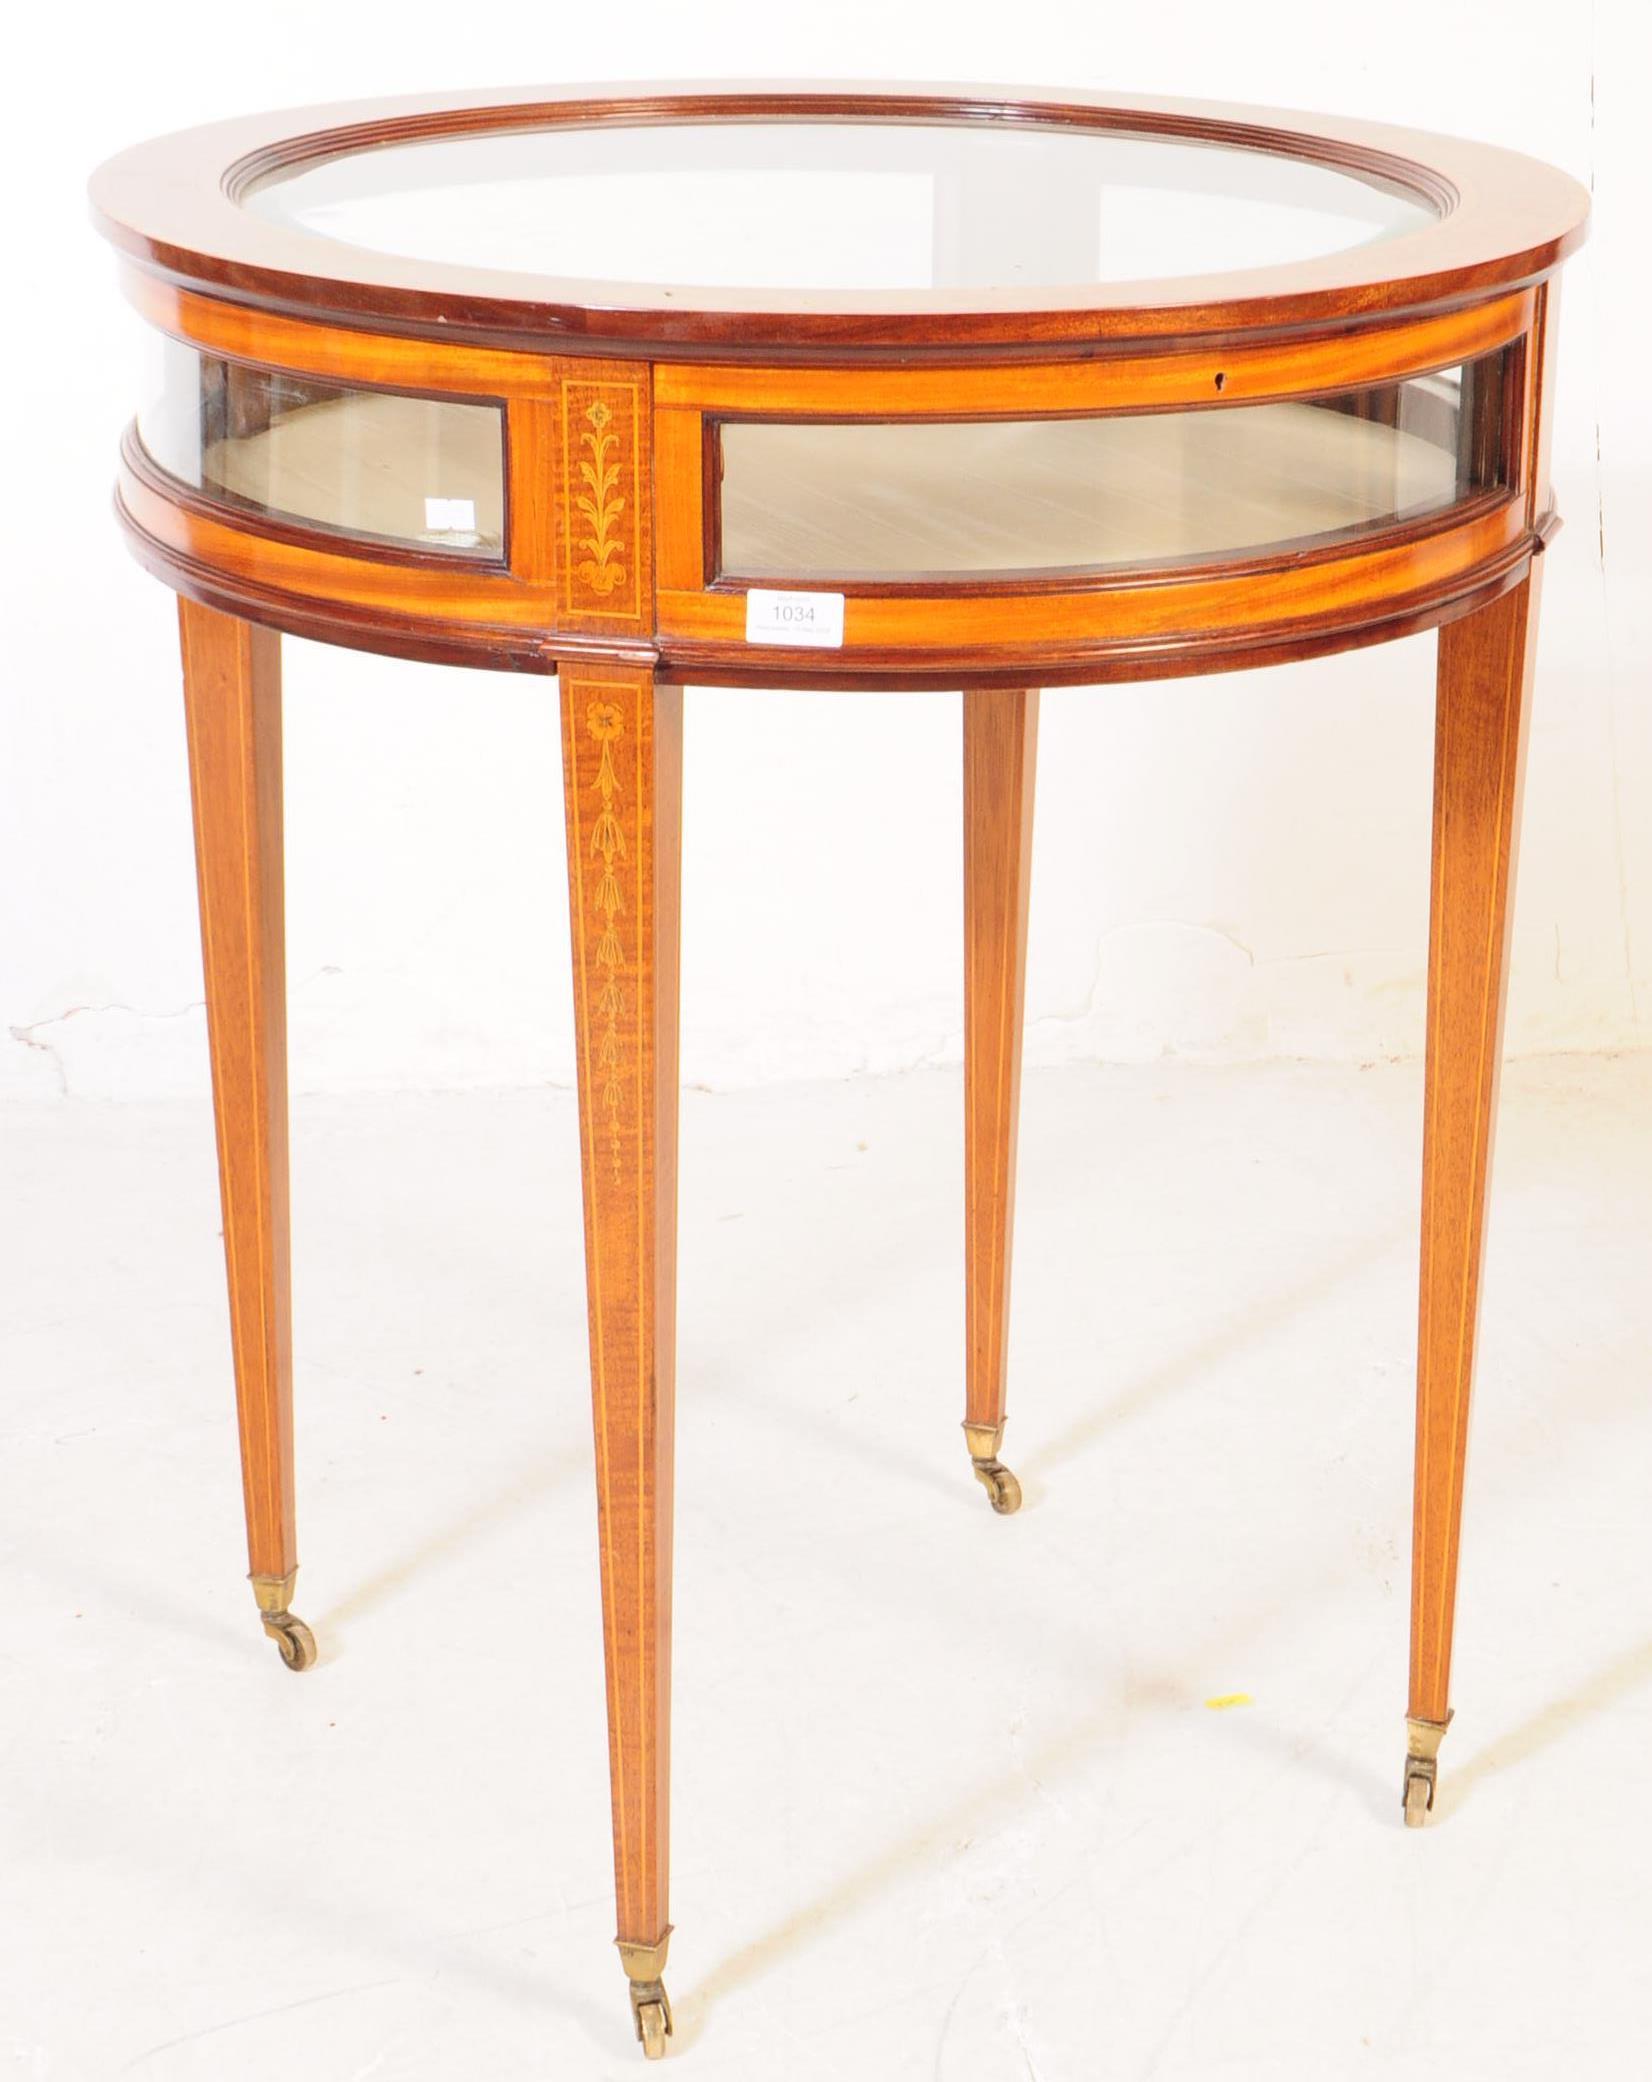 1920S INLAID BIJOUTERIE GLASS DISPLAY TABLE